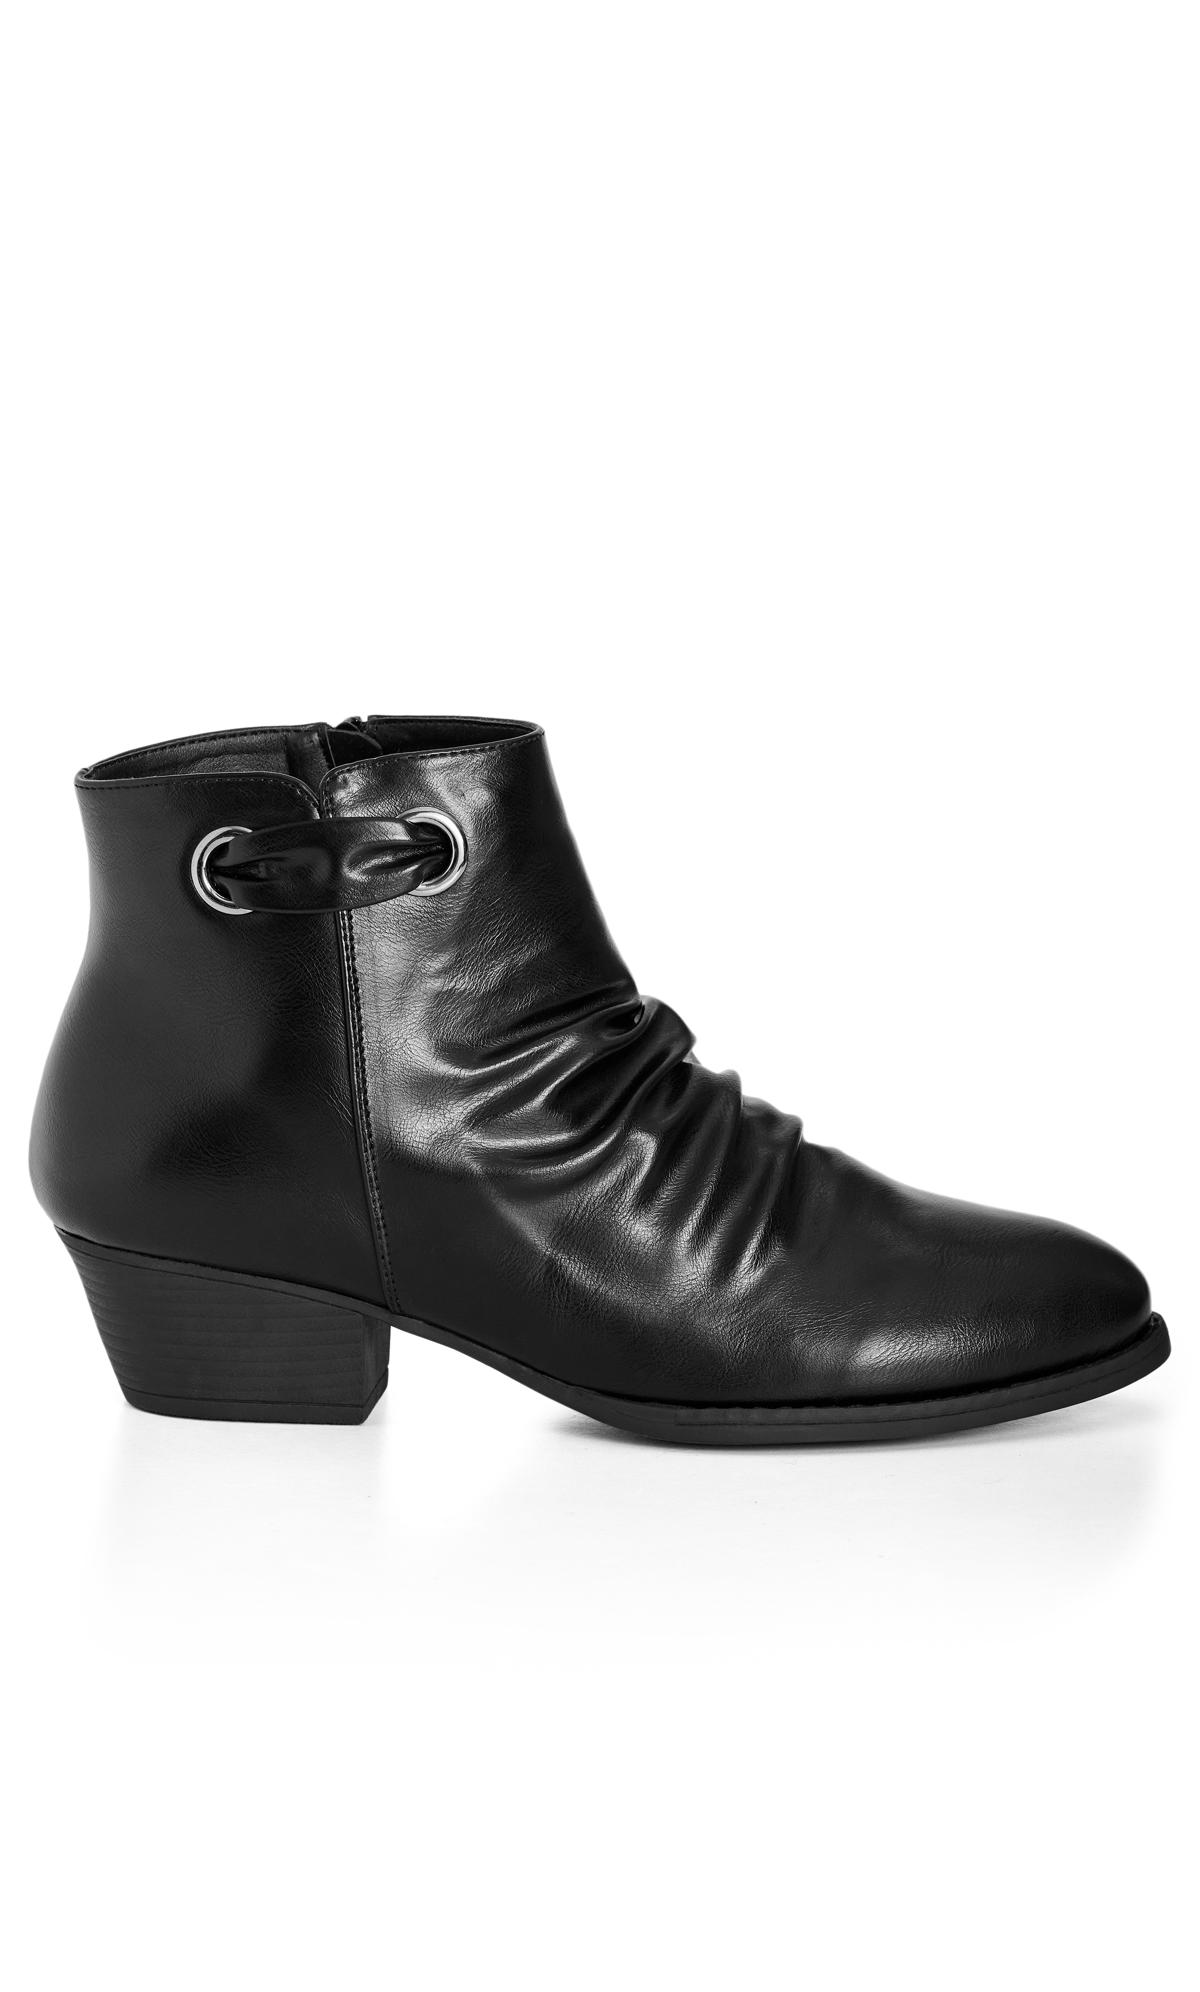 Evans Black Faux Leather Ruched Ankle Boots 2